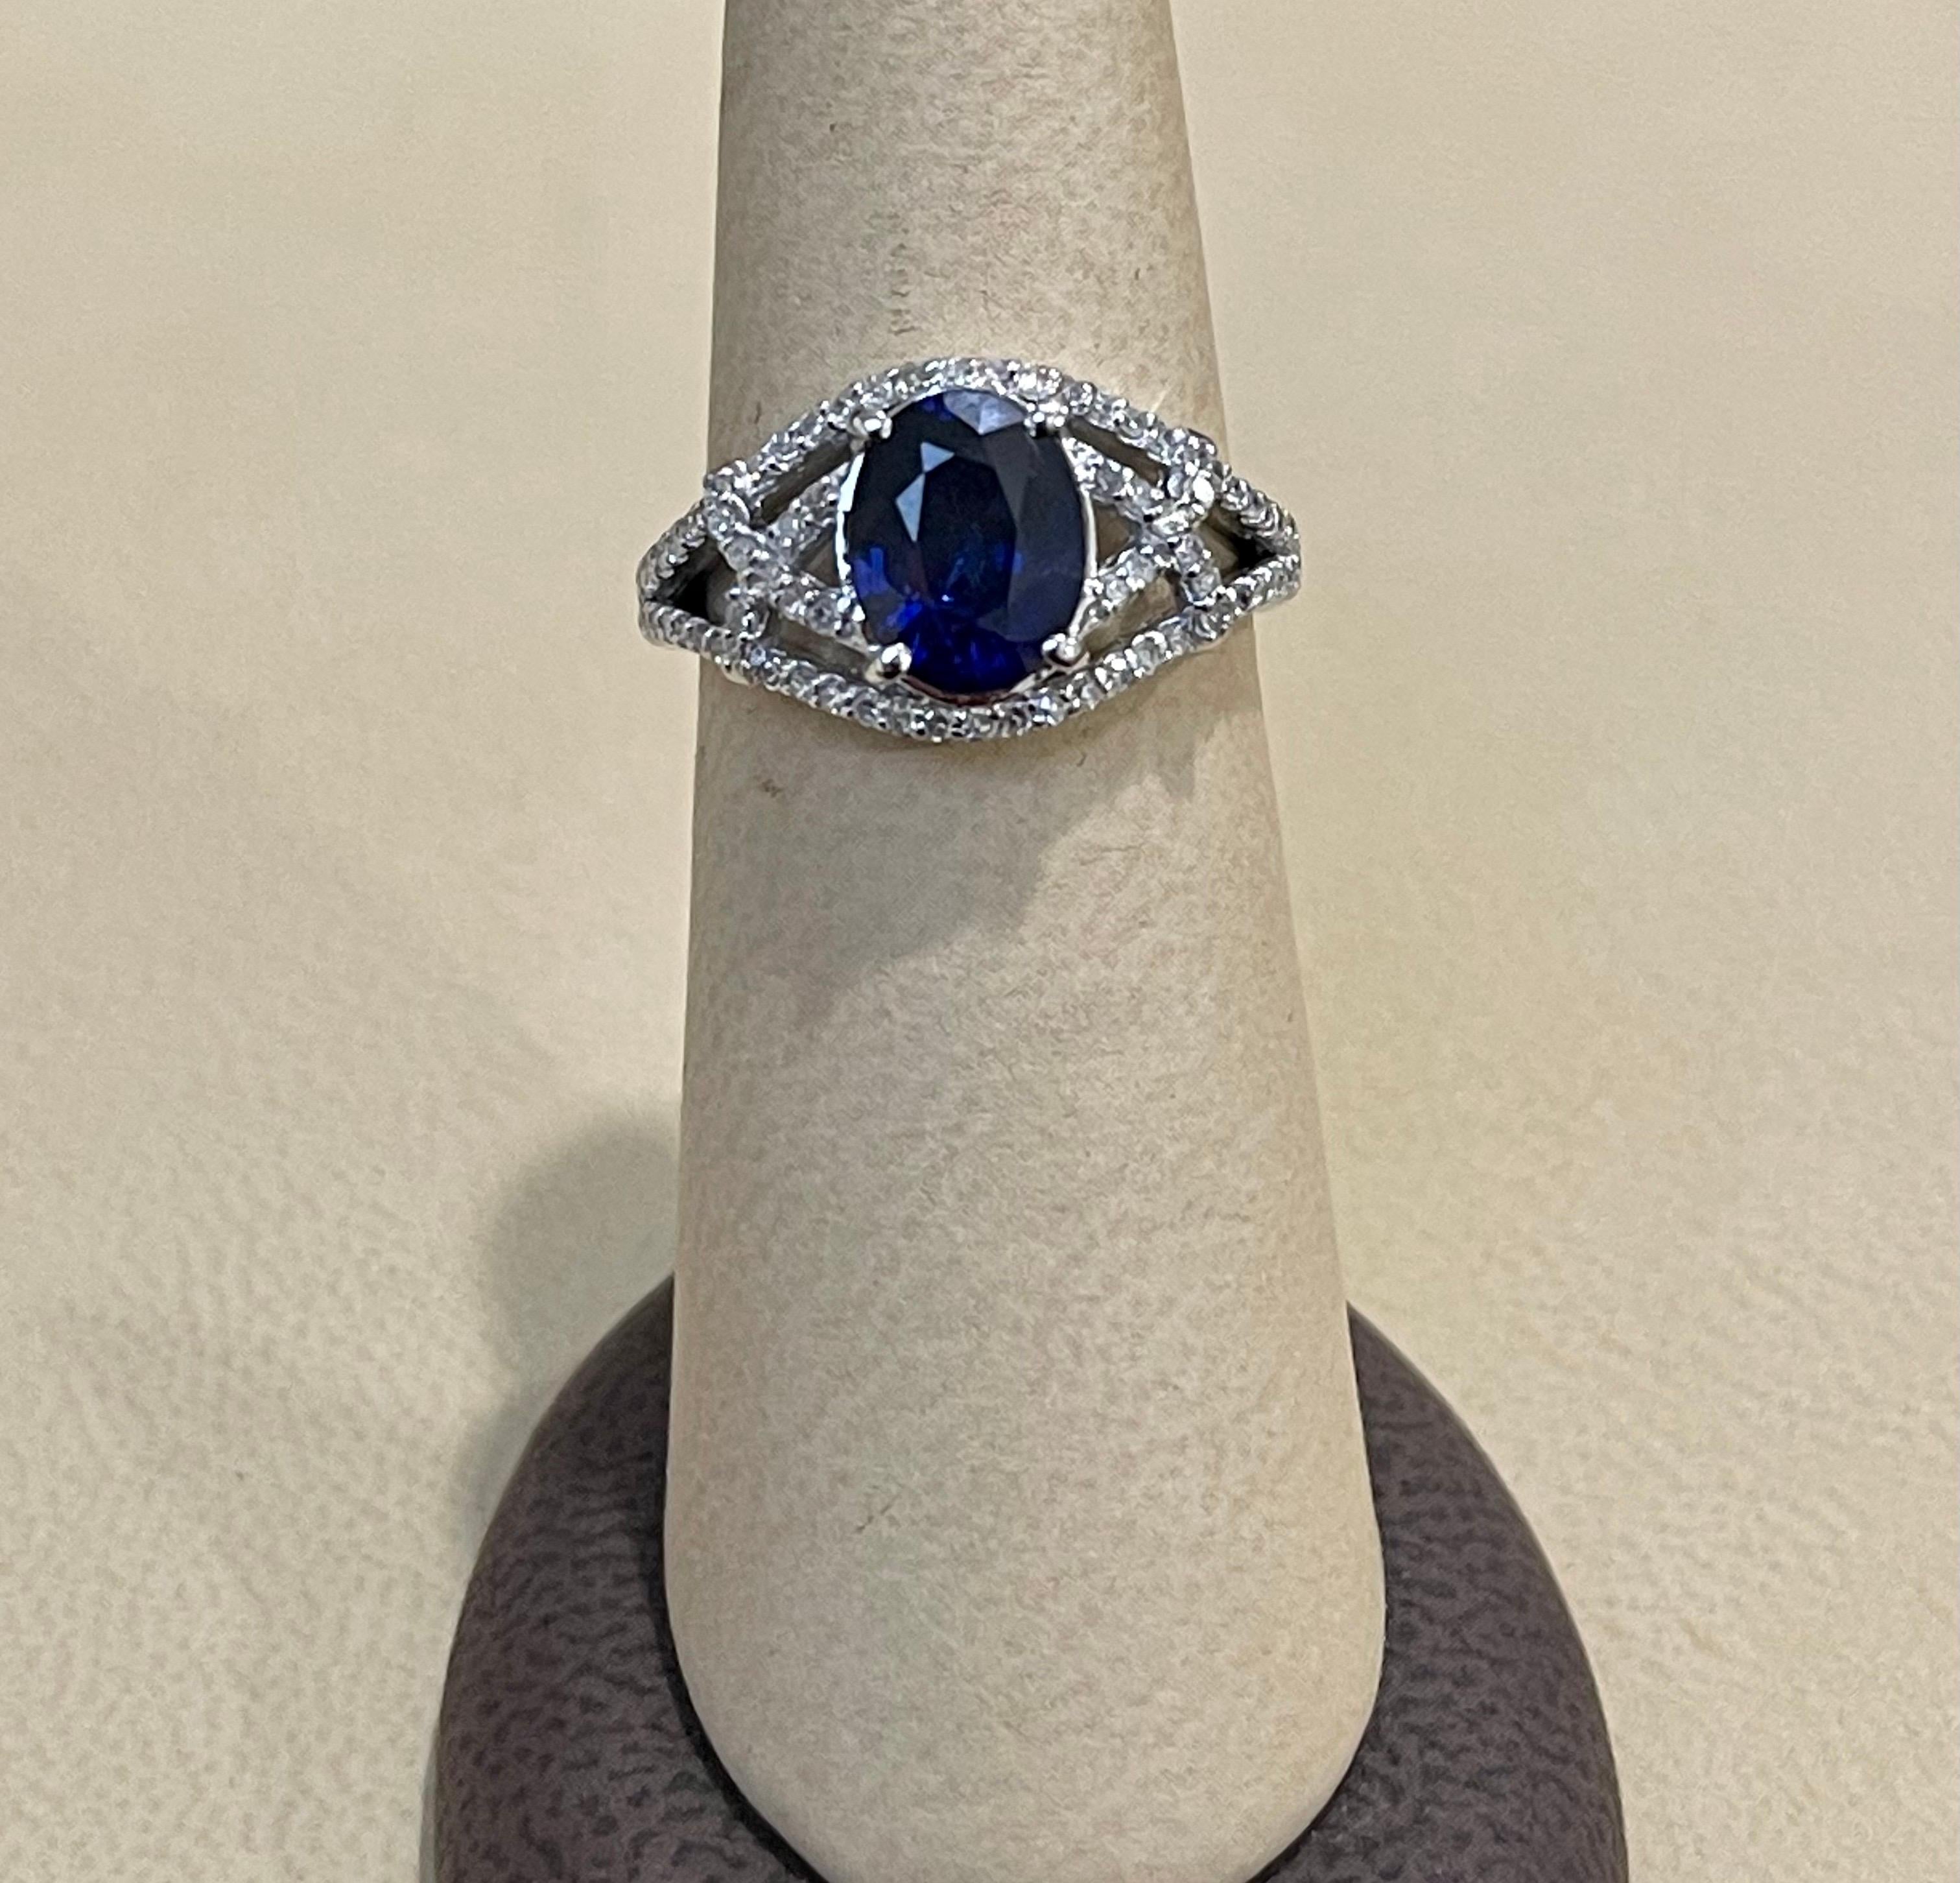 Designer Effy's 1.9 Ct Blue Sapphire & 0.36Ct Diamond Cocktail Ring in 14 Karat White Gold
Brilliant cut round cut diamond 74 piece , ).5 Pointer each
14 Karat White Gold 5 Grams
1.9 Ct Natural Diffused Ceylon Sapphire 
Ring Size 7  ( it can be